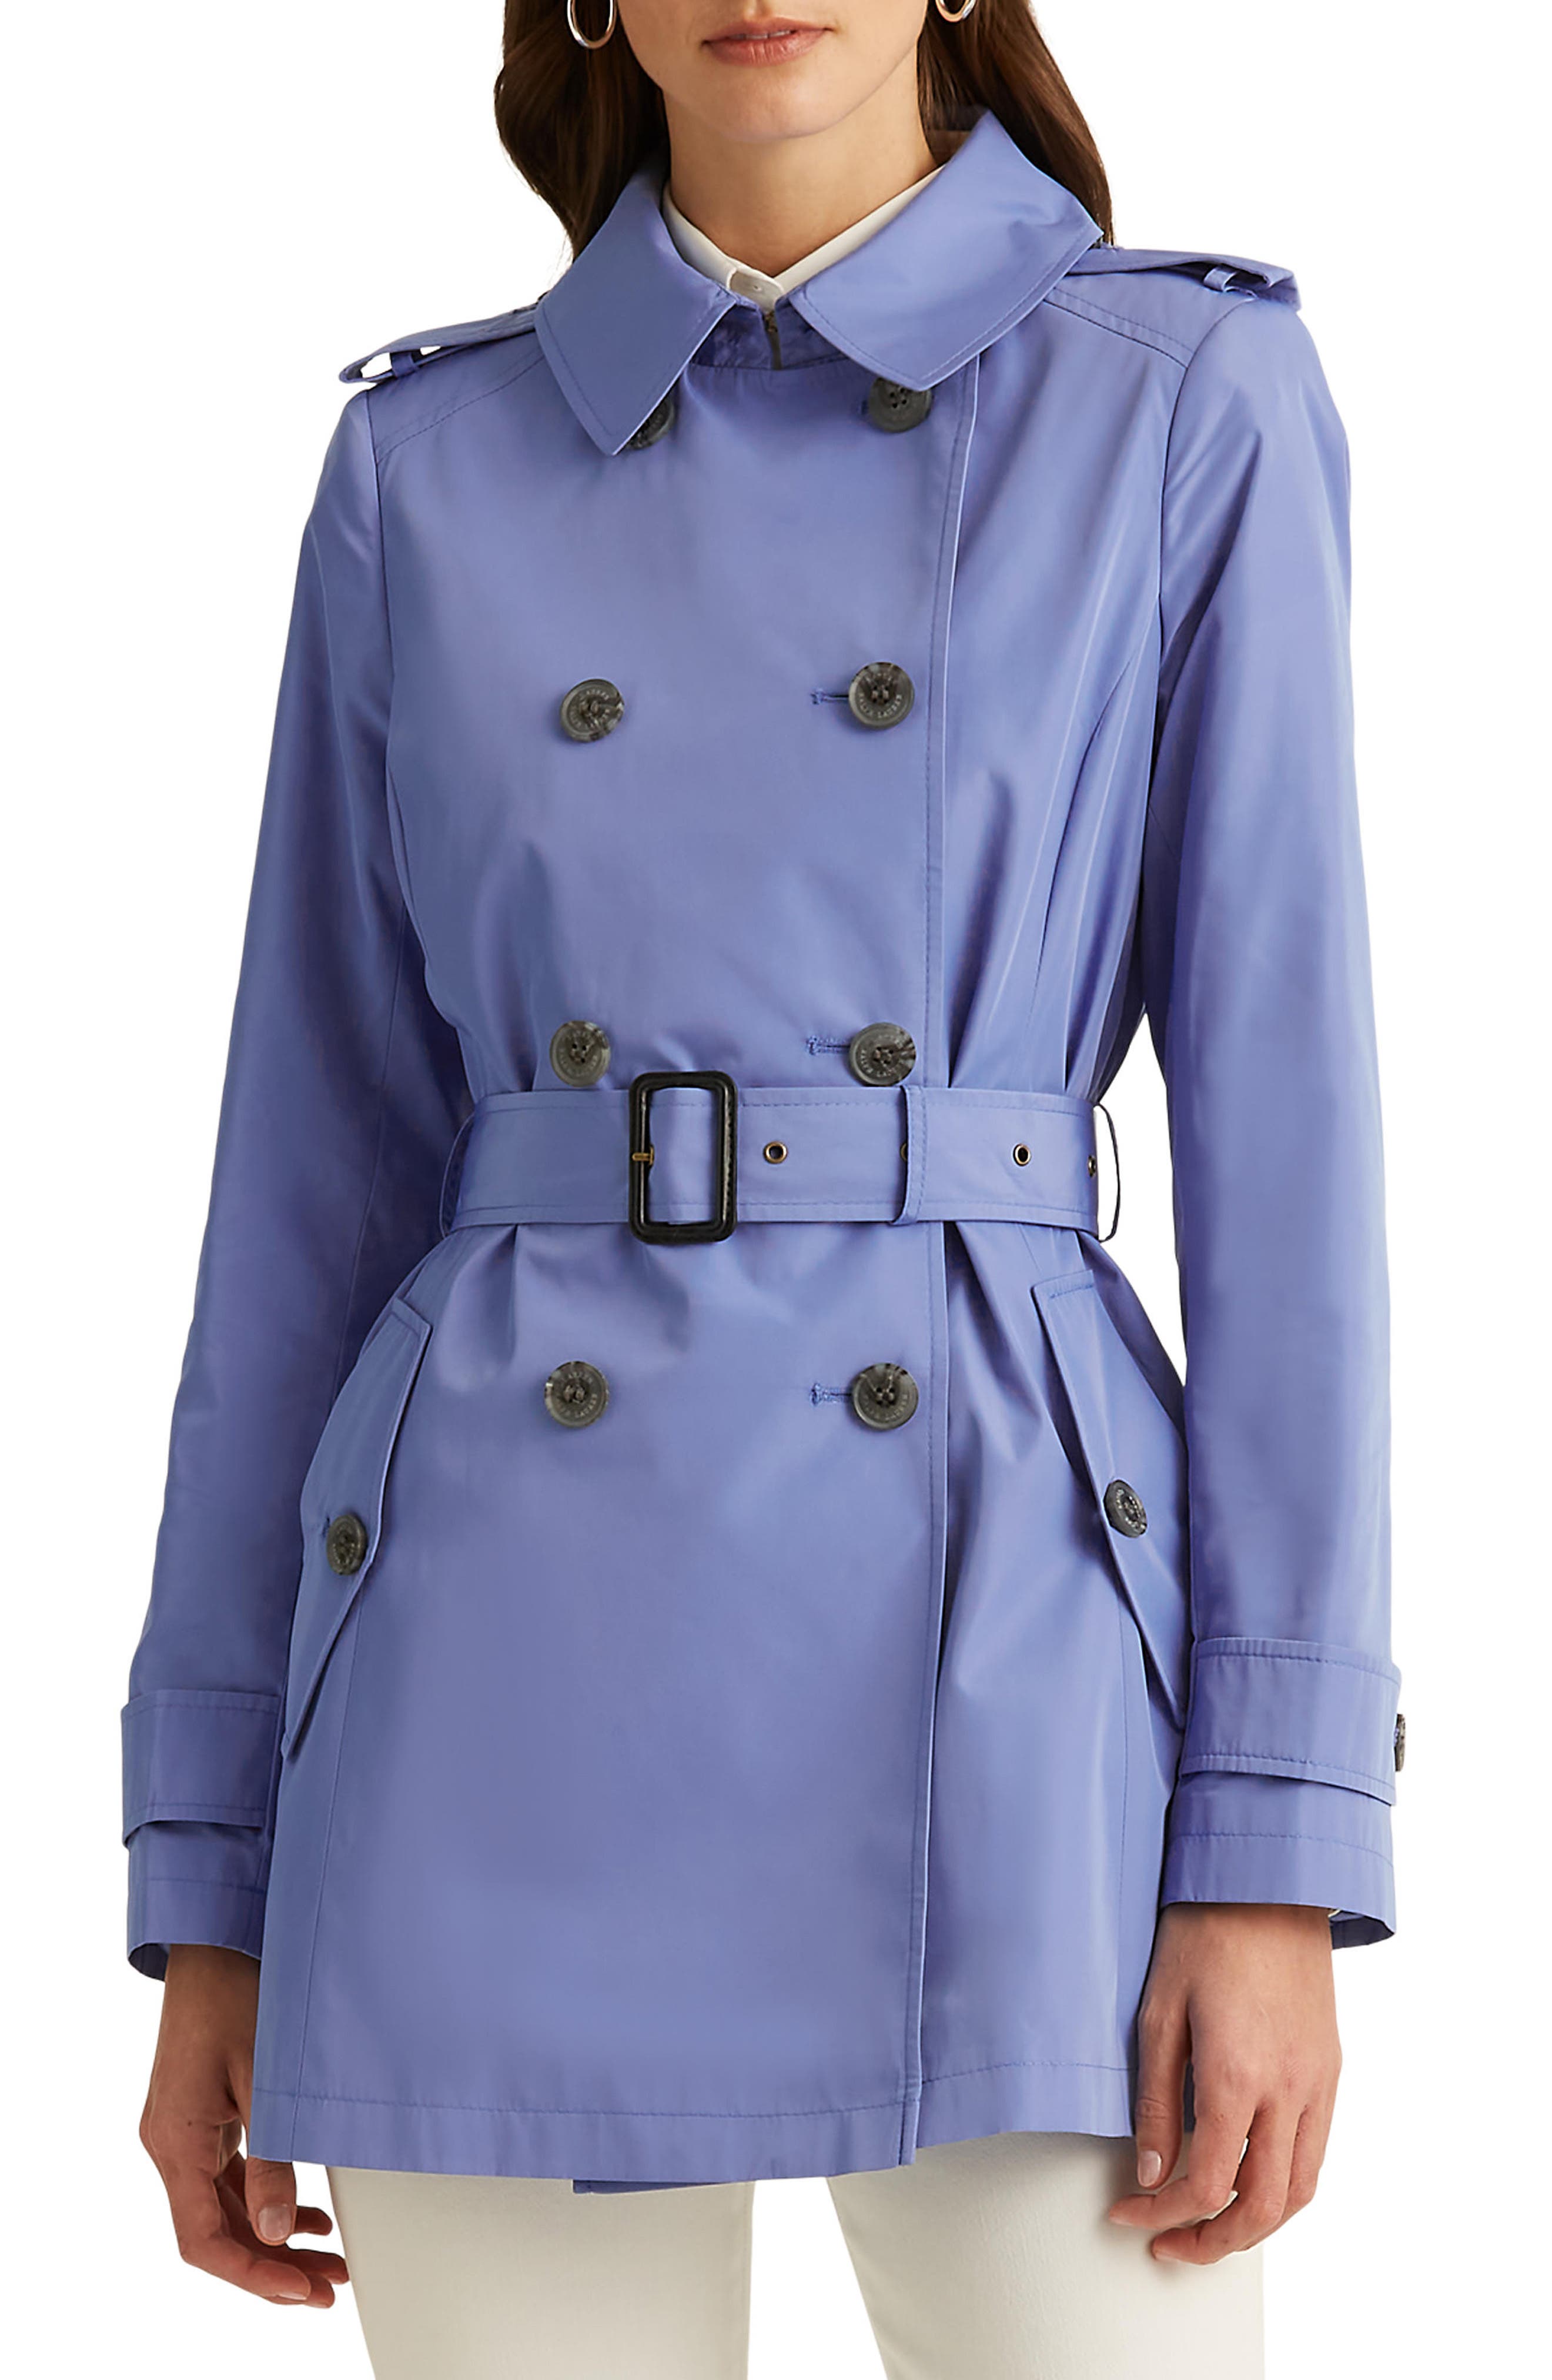 VICKY SMITH LONDON New Ladies Belted MAC Trench Coat Lined 35 Length